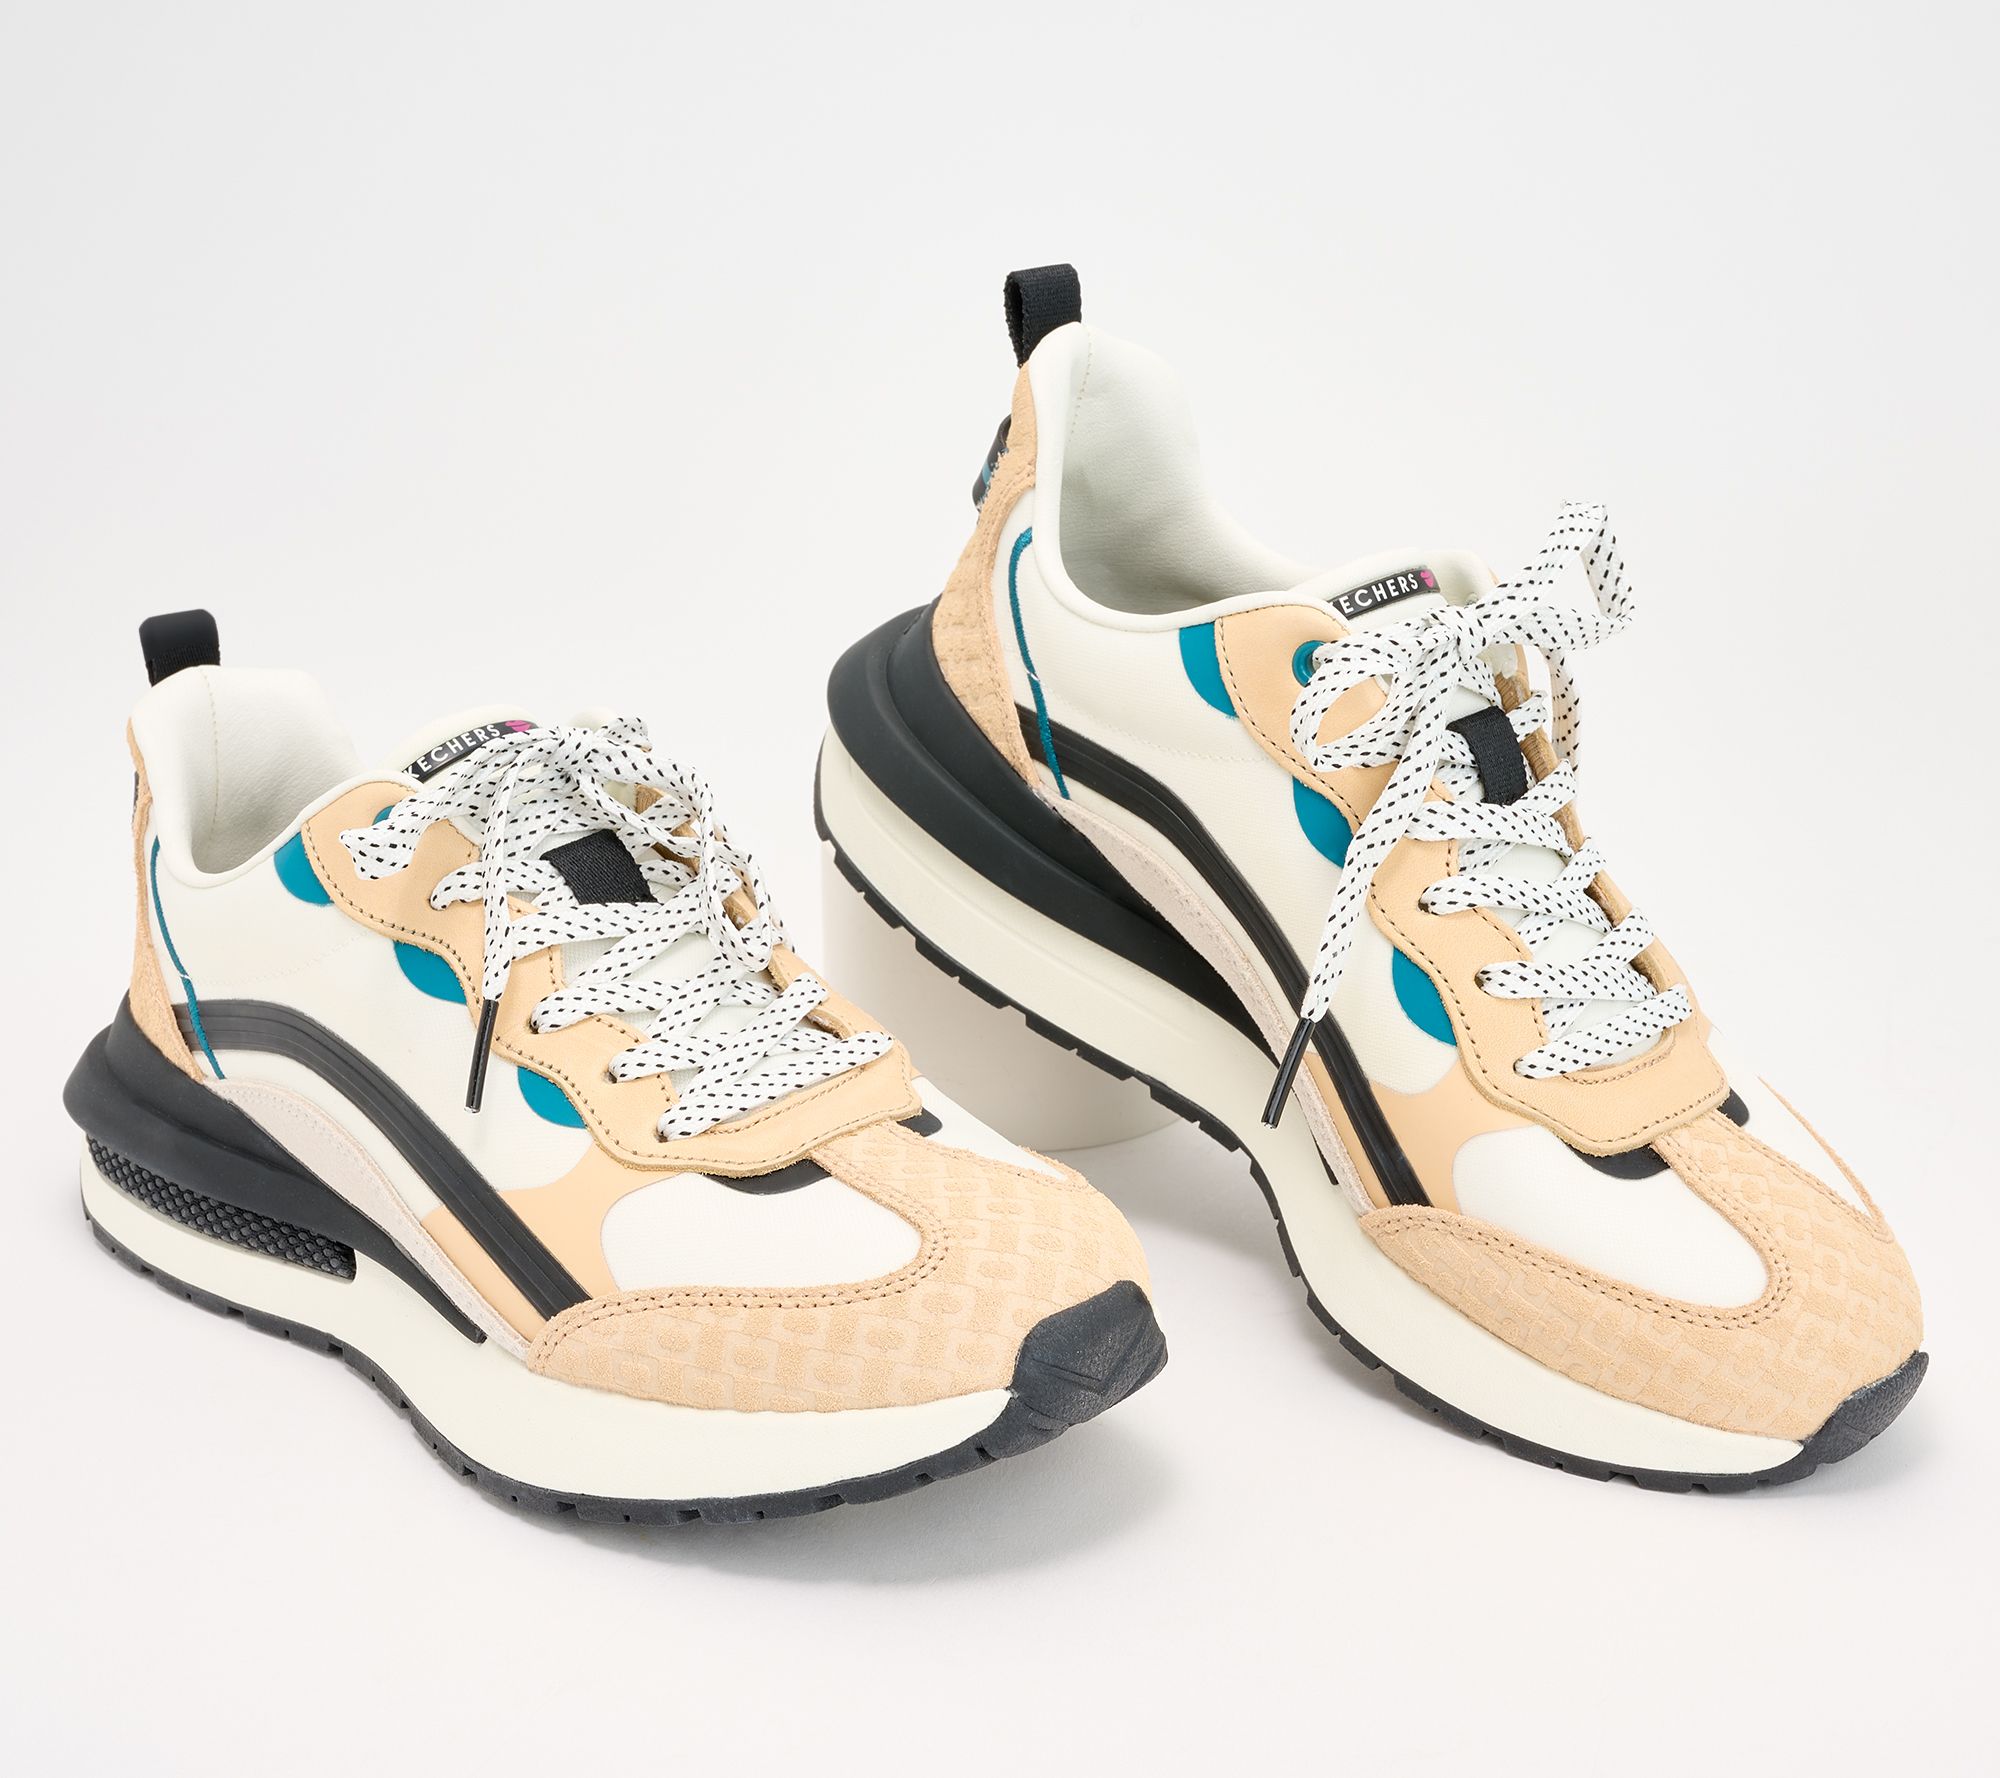 DVF x Skechers Suede Lace-Up Sneakers - Halos - QVC.com